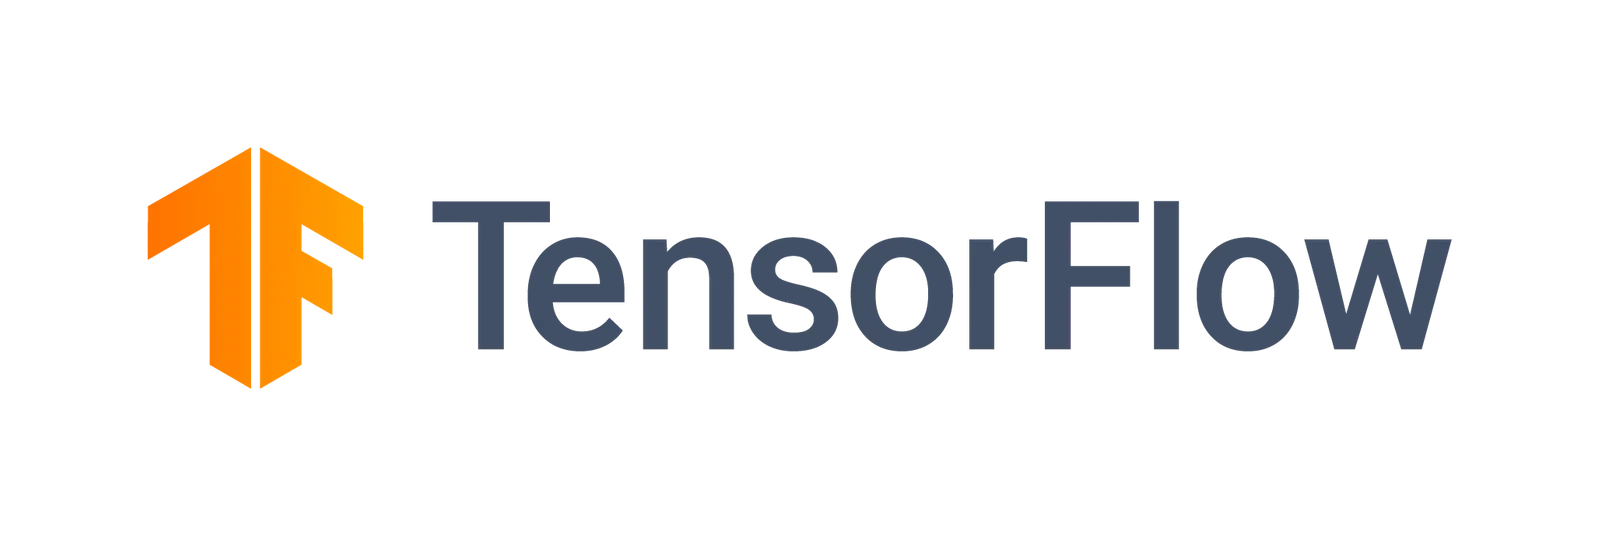 End-to-End Machine Learning in JavaScript Using Danfo.js and TensorFlow.js